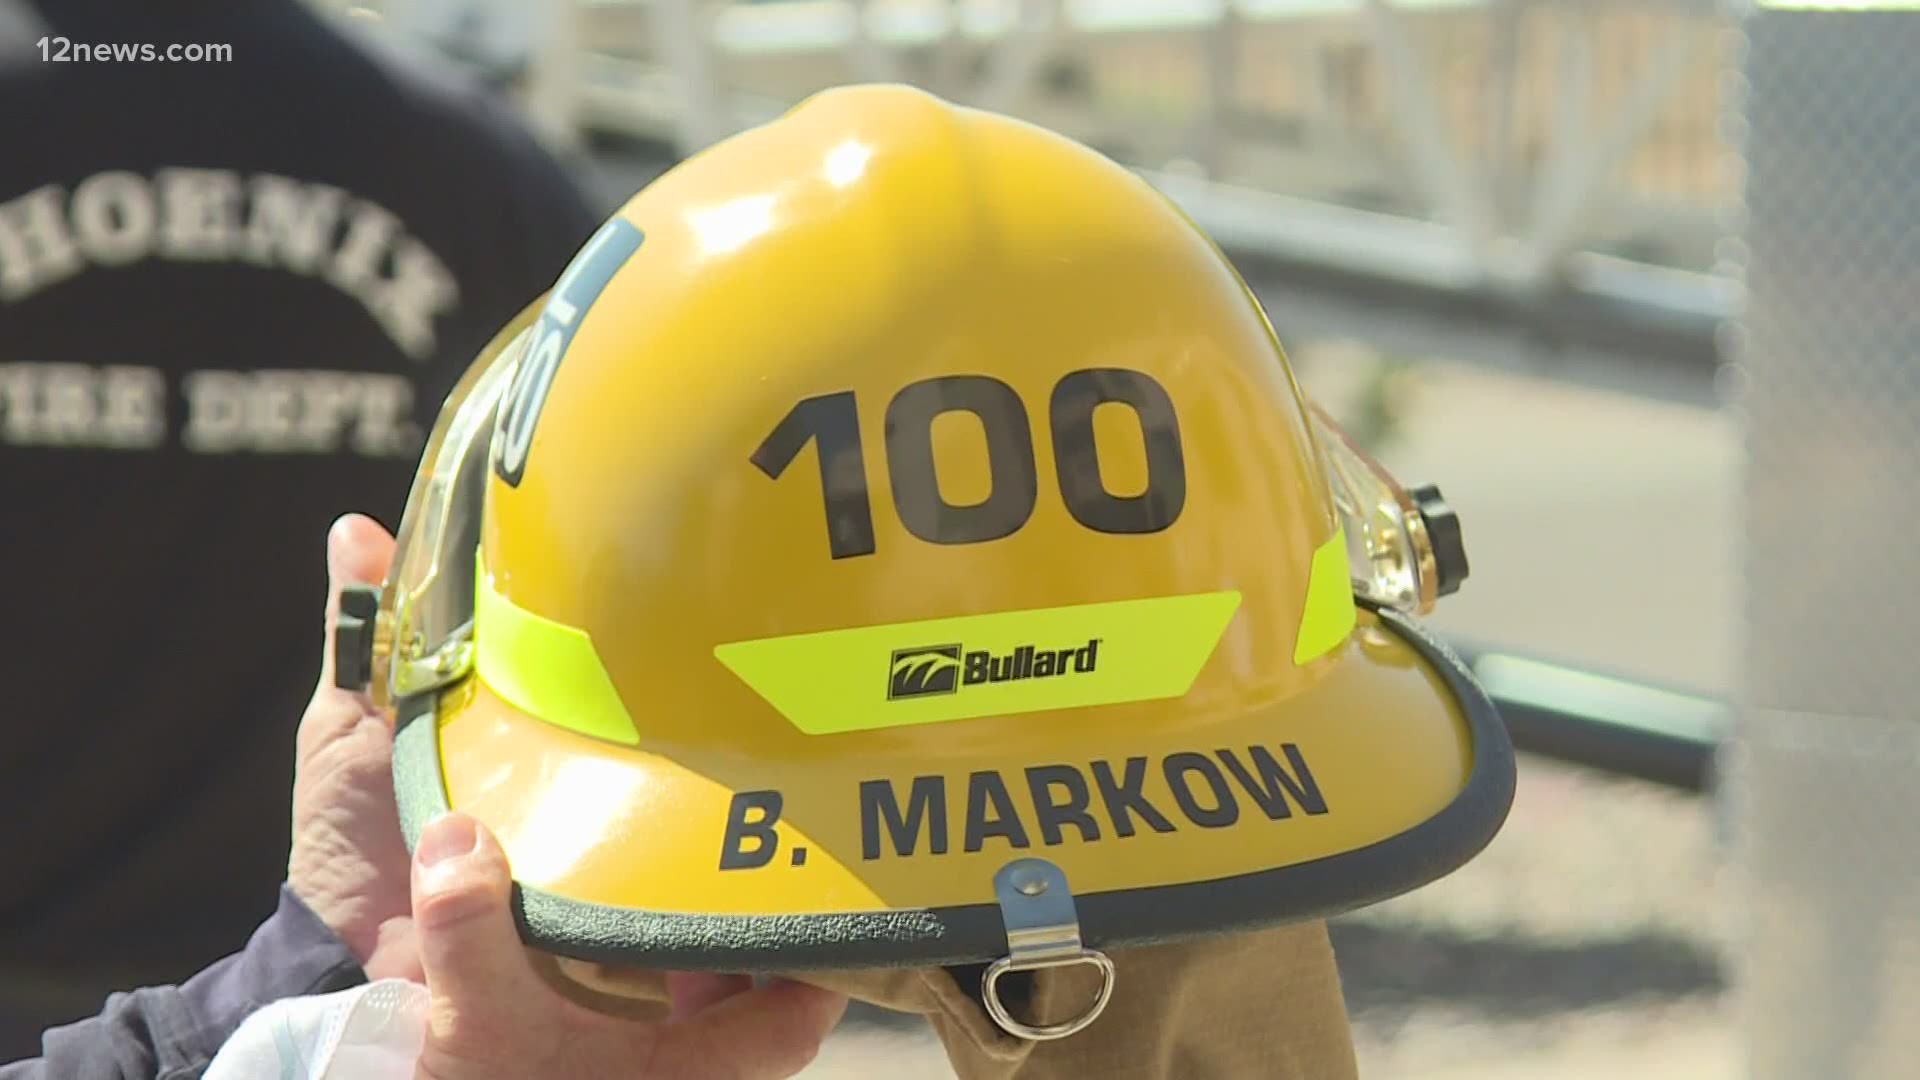 Phoenix firefighters and family ascend to wish Bea Markow a happy 100th birthday! All of this was a surprise, including a birthday present, a fire fighter's helmet!